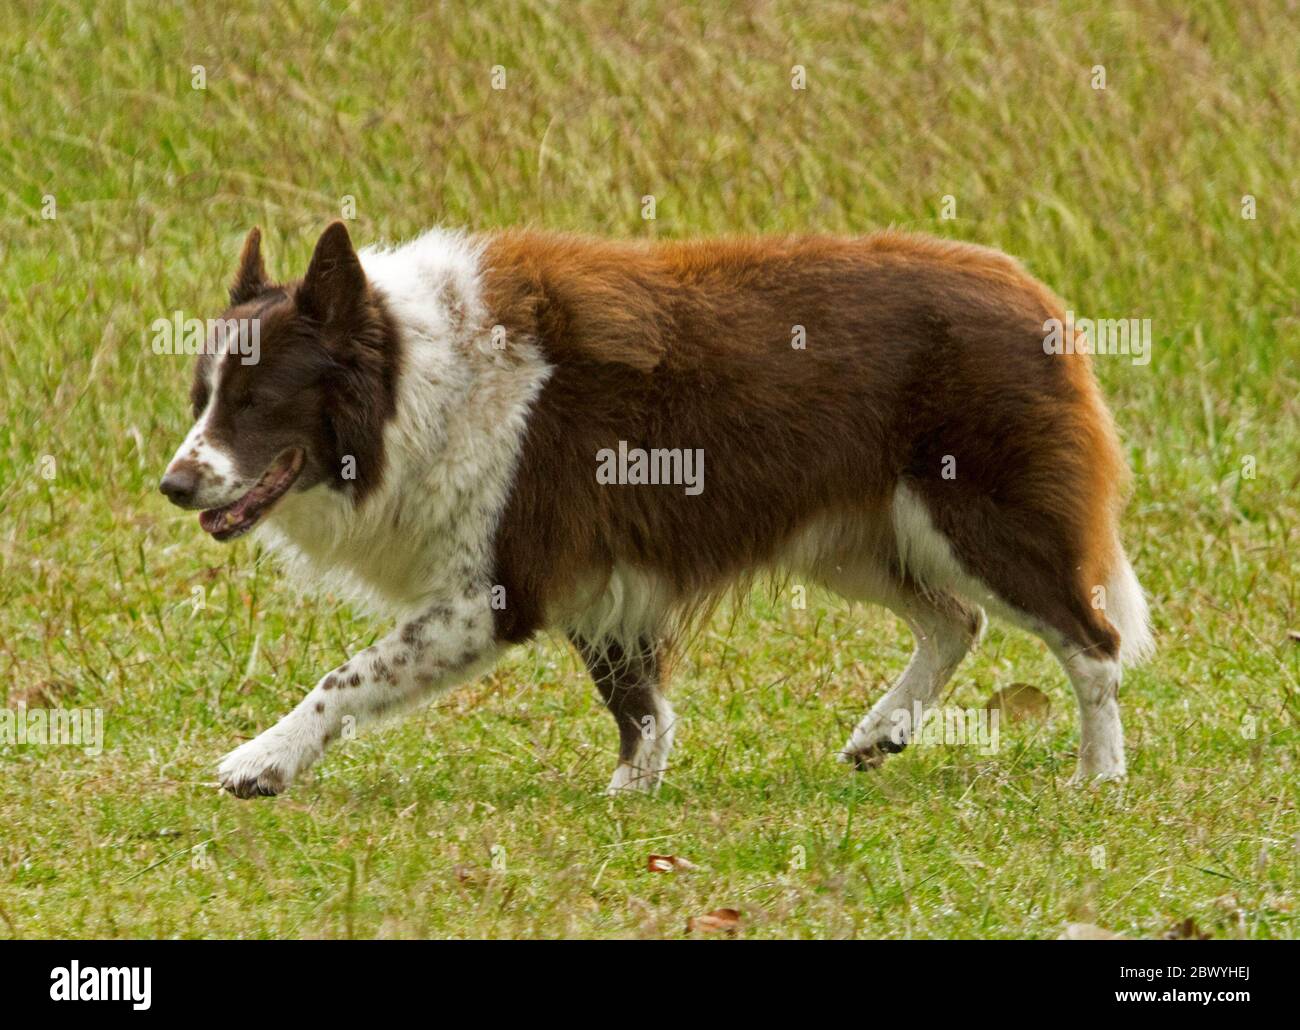 Long haired brown and white border collie working dog / pet with happy expression walking across green grass in Queensland, Australia Stock Photo